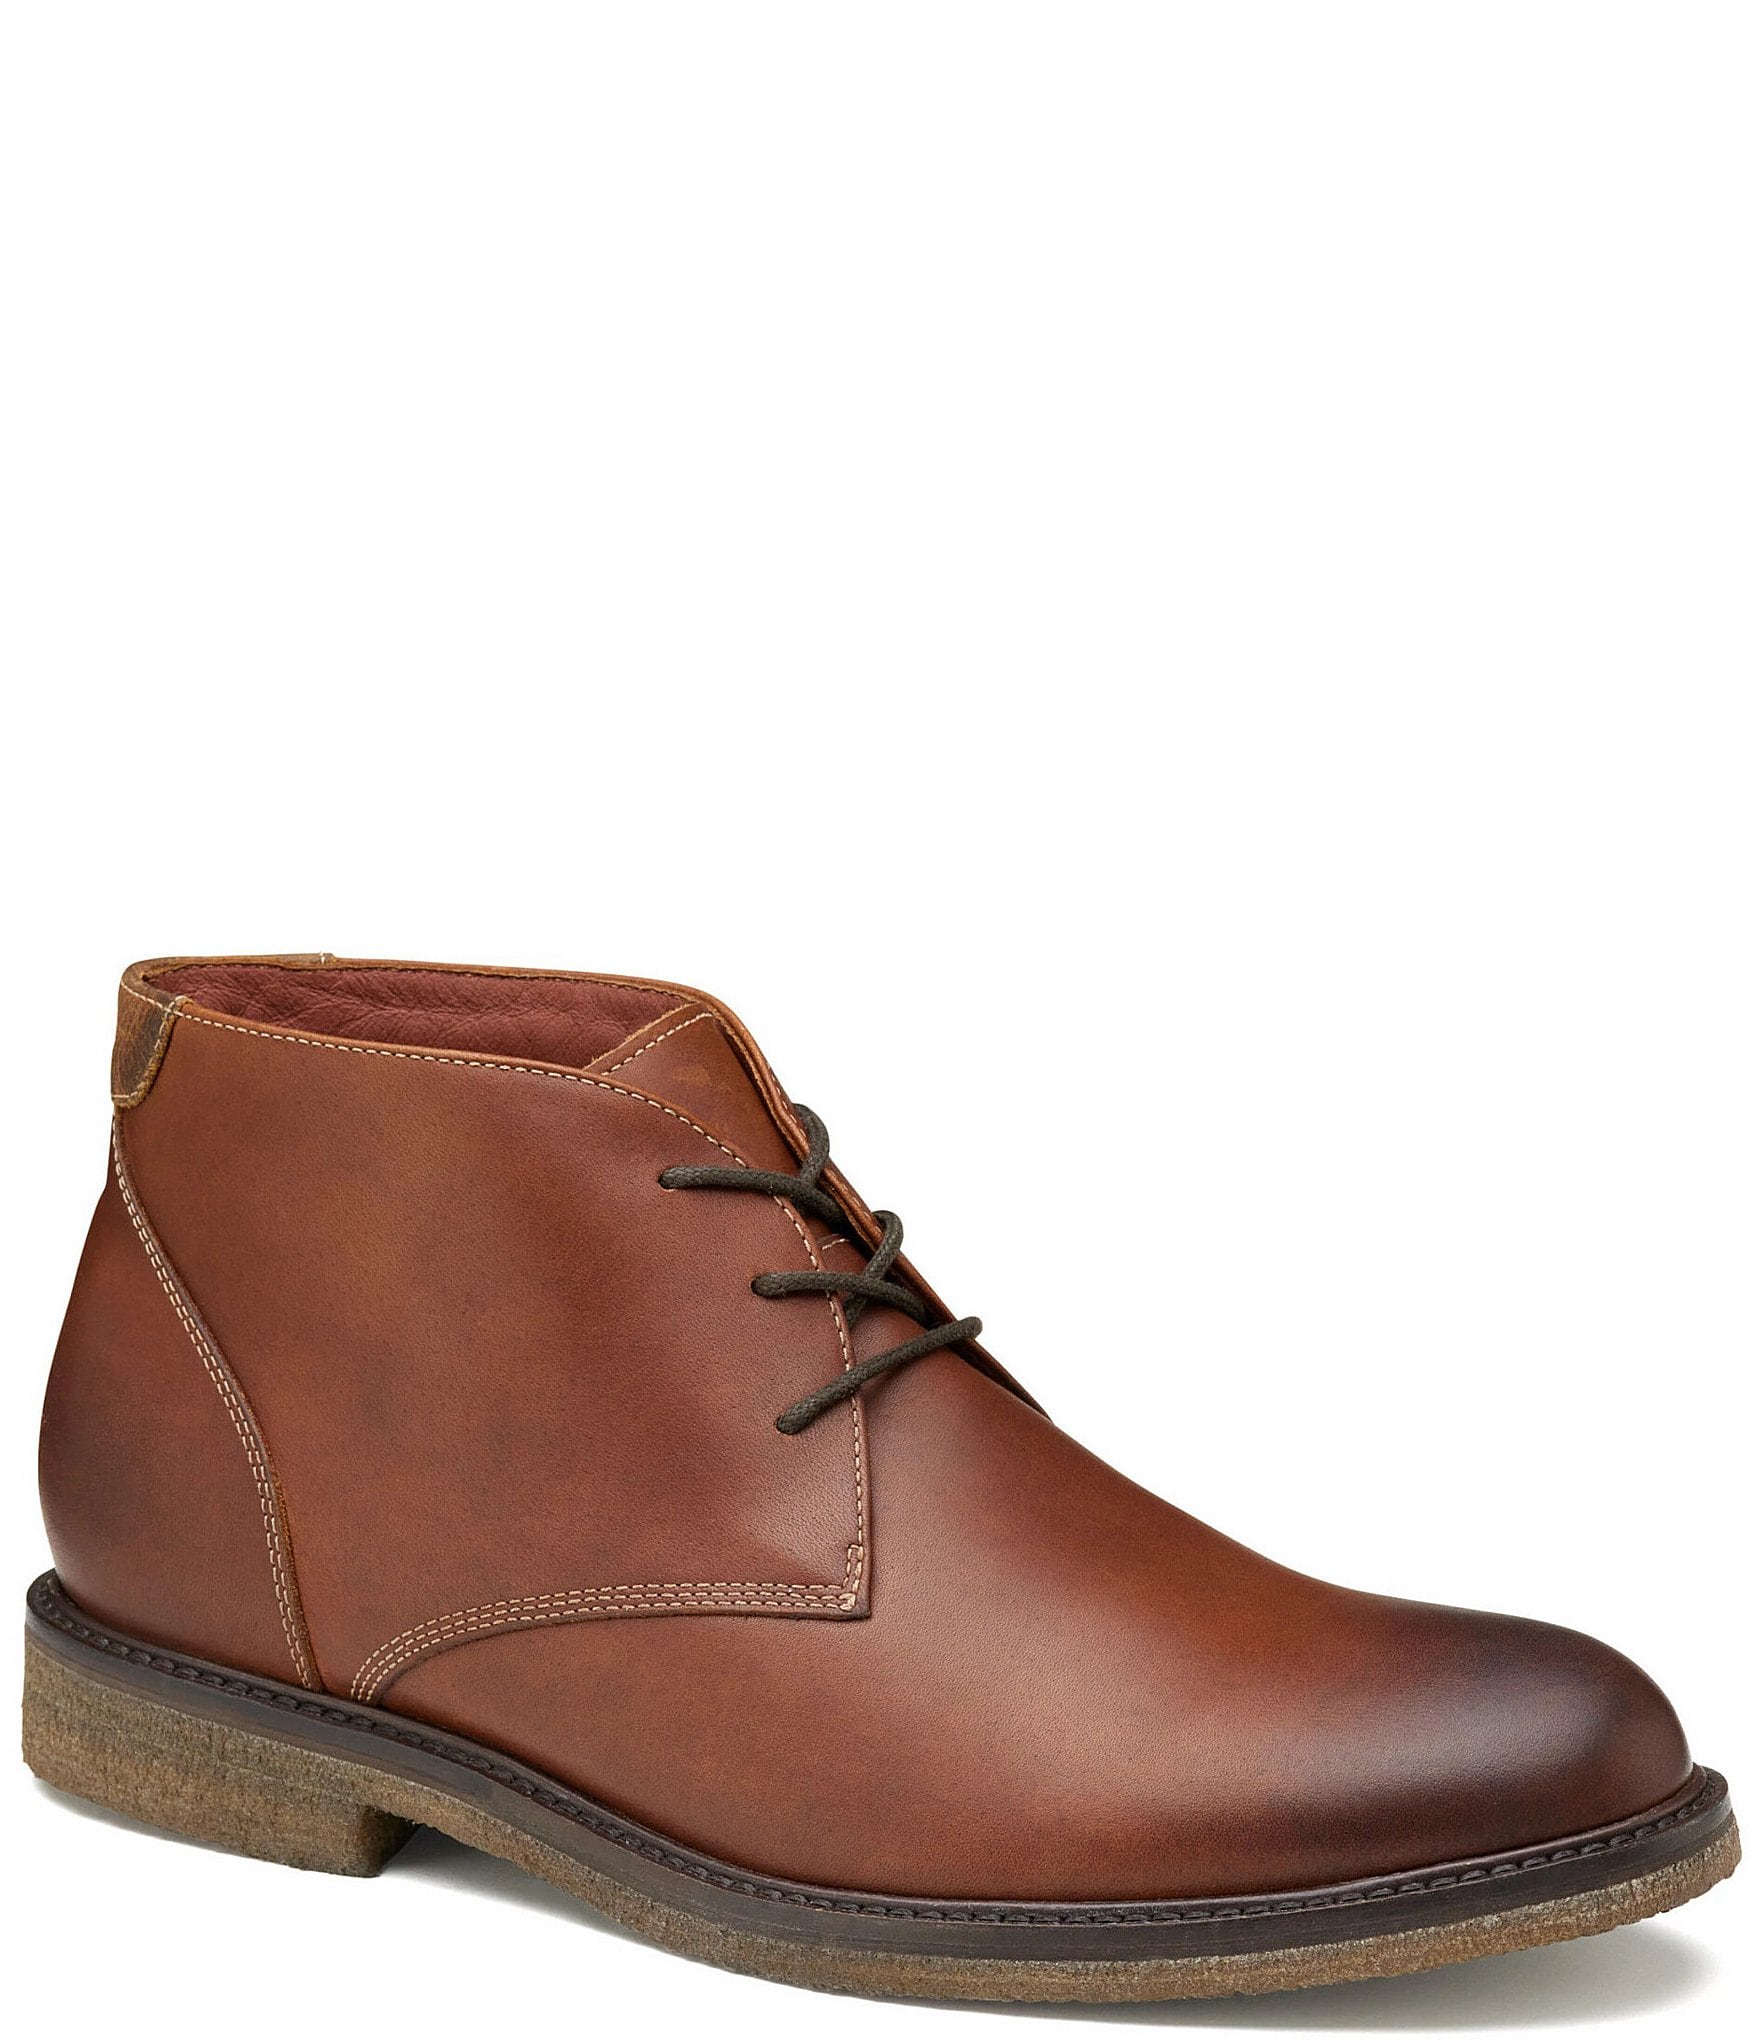 Copeland Water Resistant Chukka Boots 